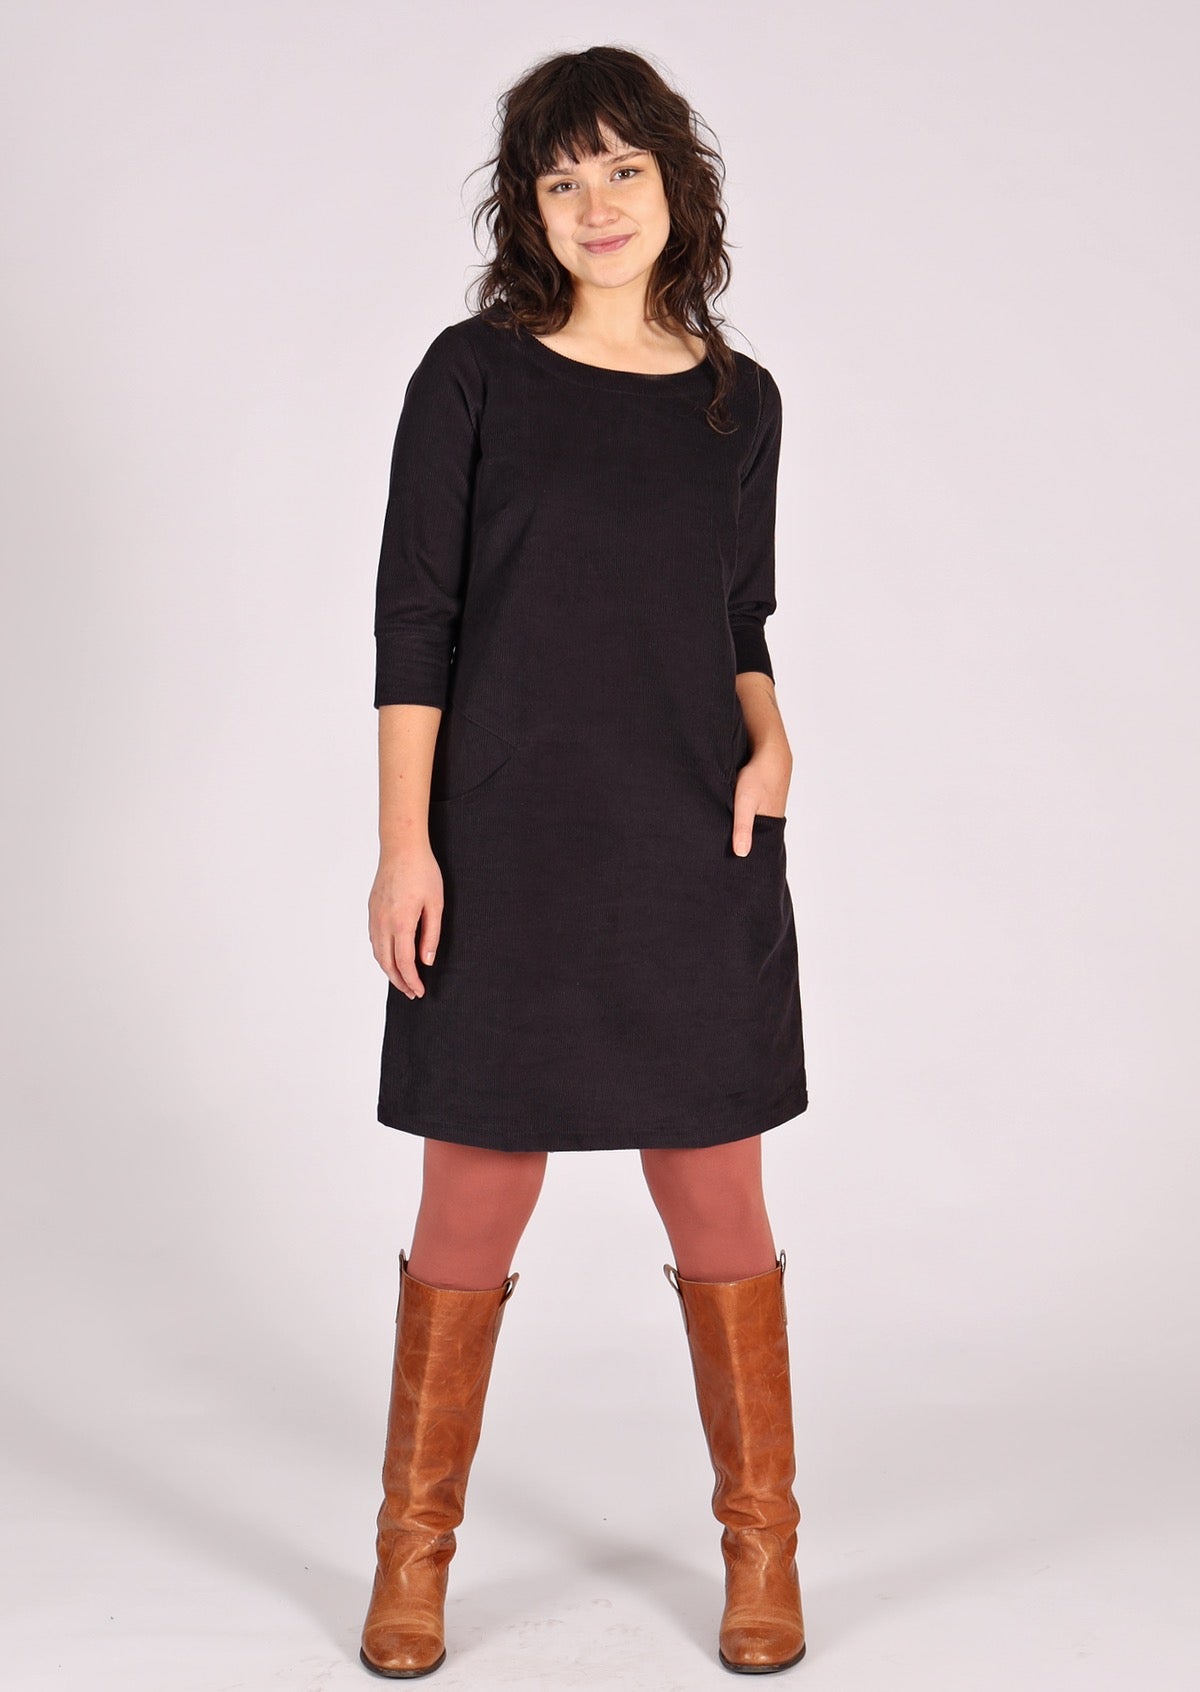 Cotton corduroy dress with pockets and side zip